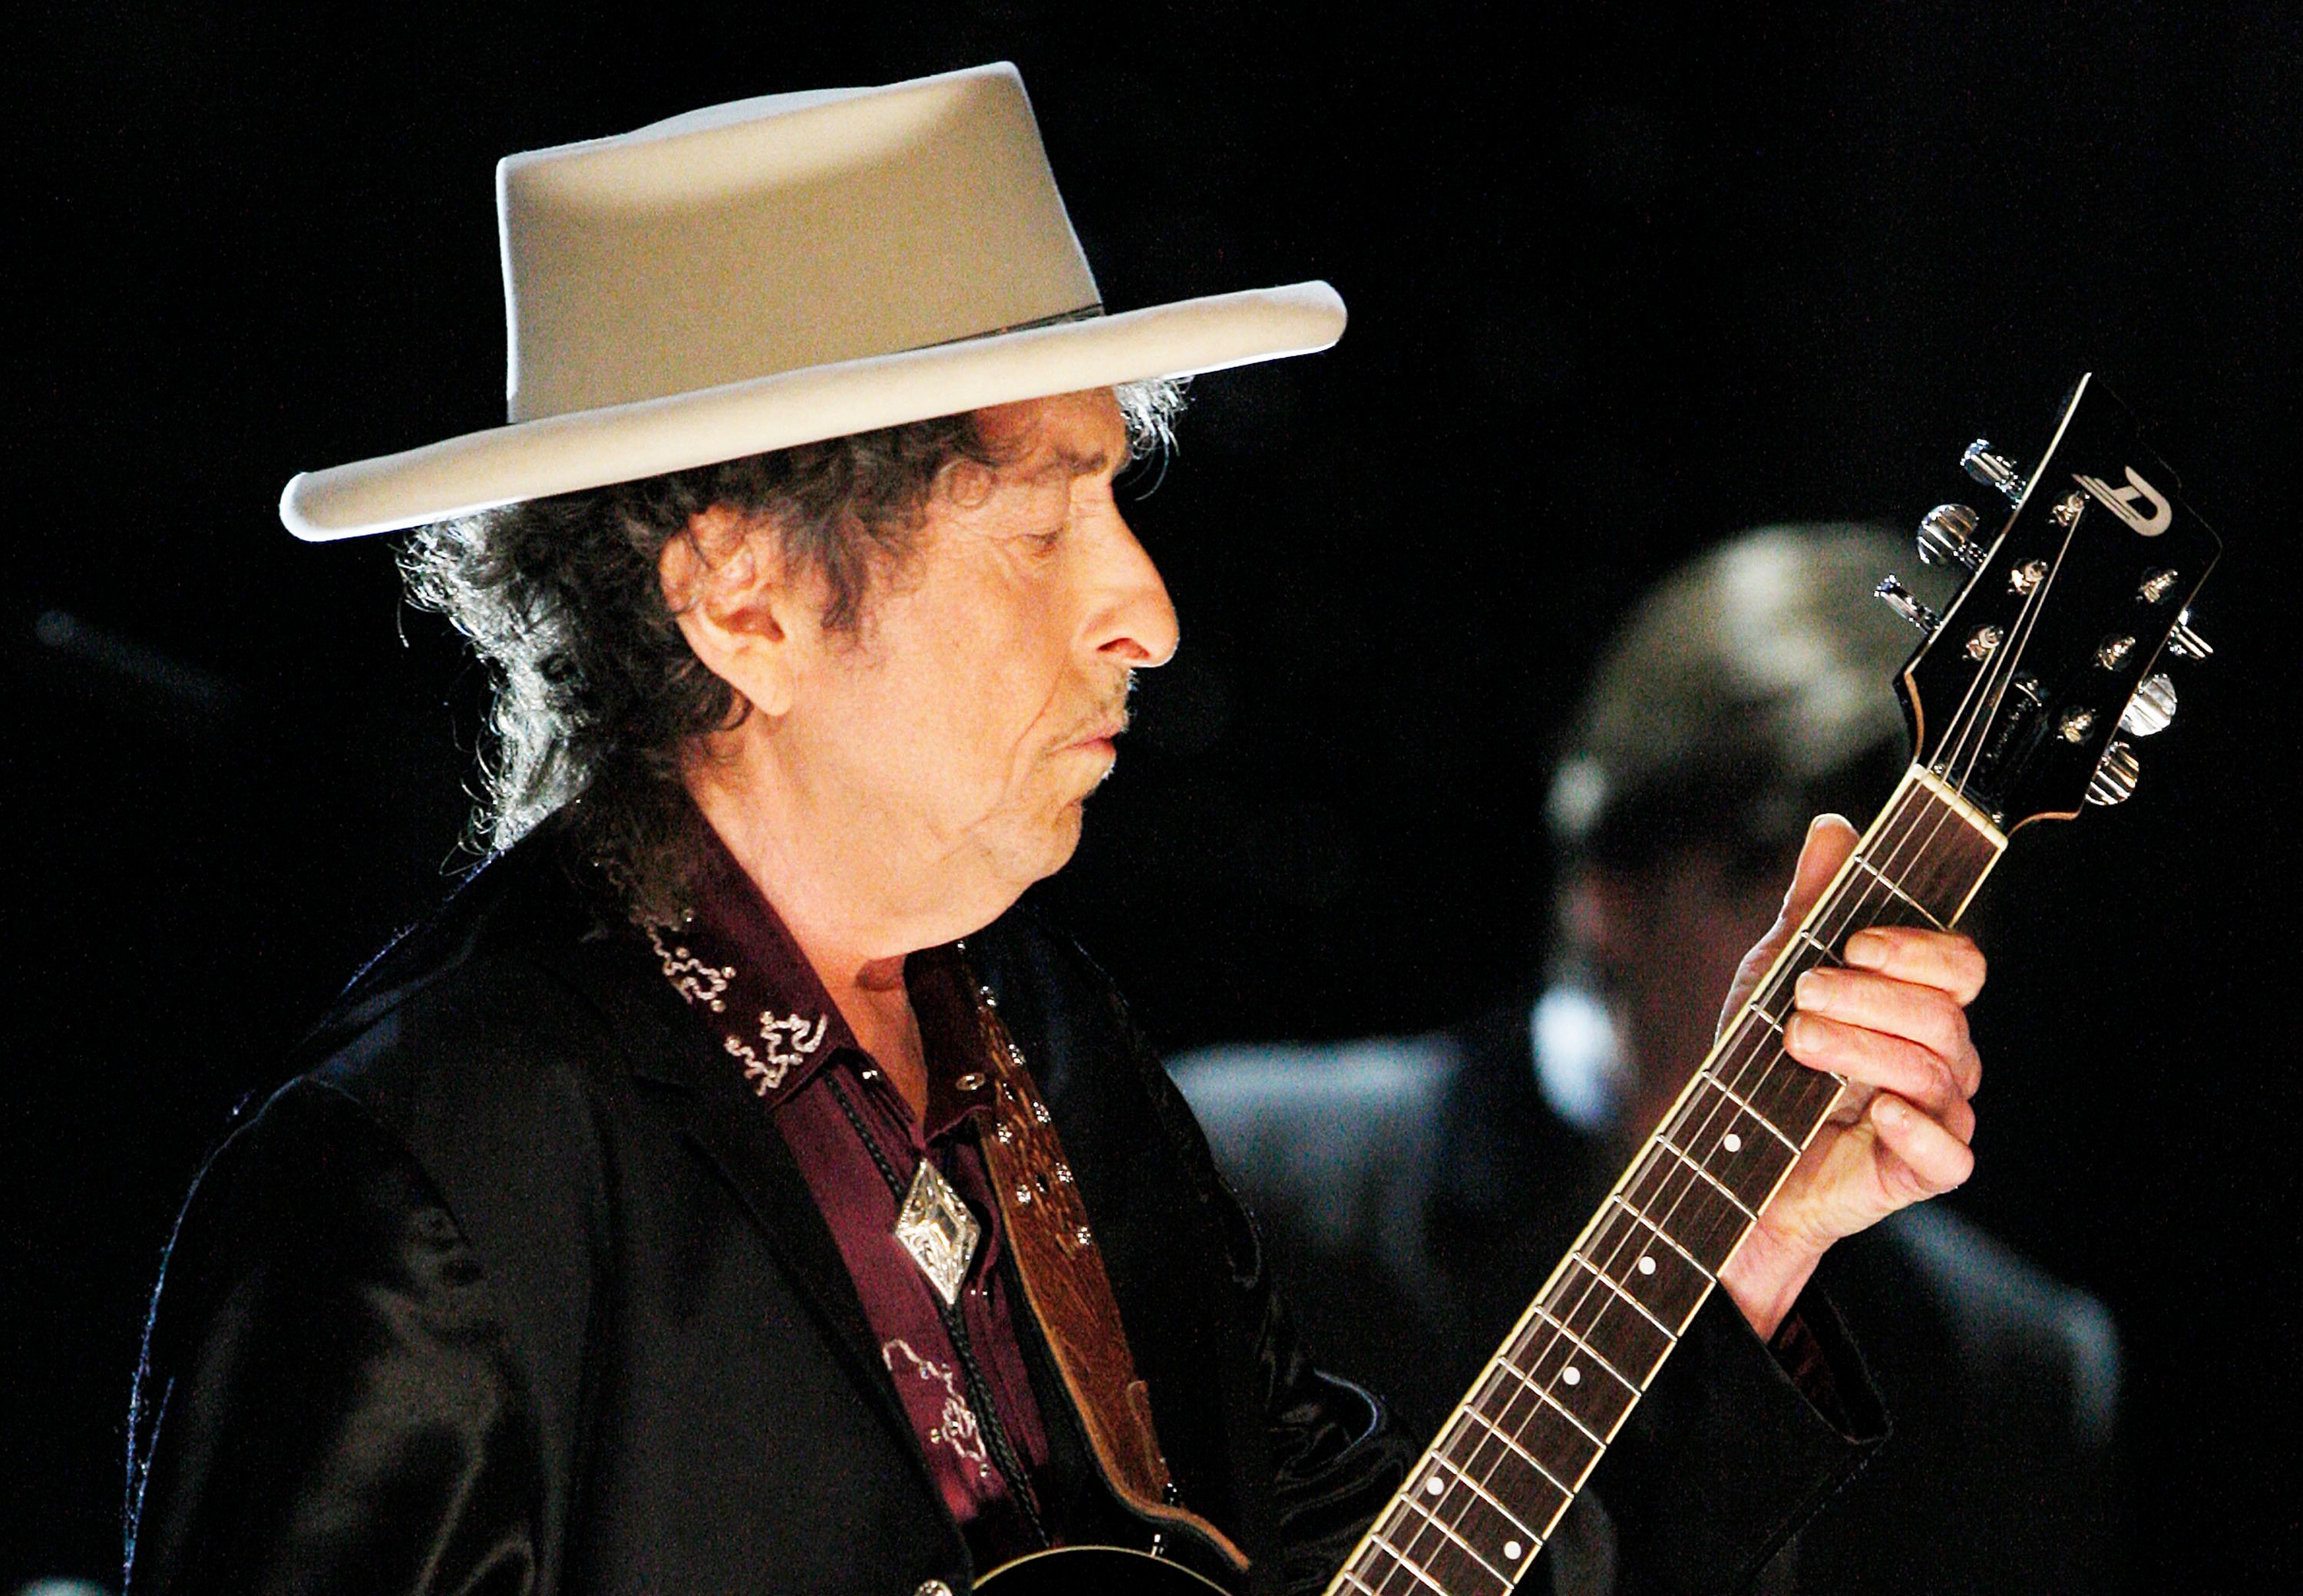 Bob Dylan performs at the 37th AFI Life Achievement Awards in 2009 in Culver City, California